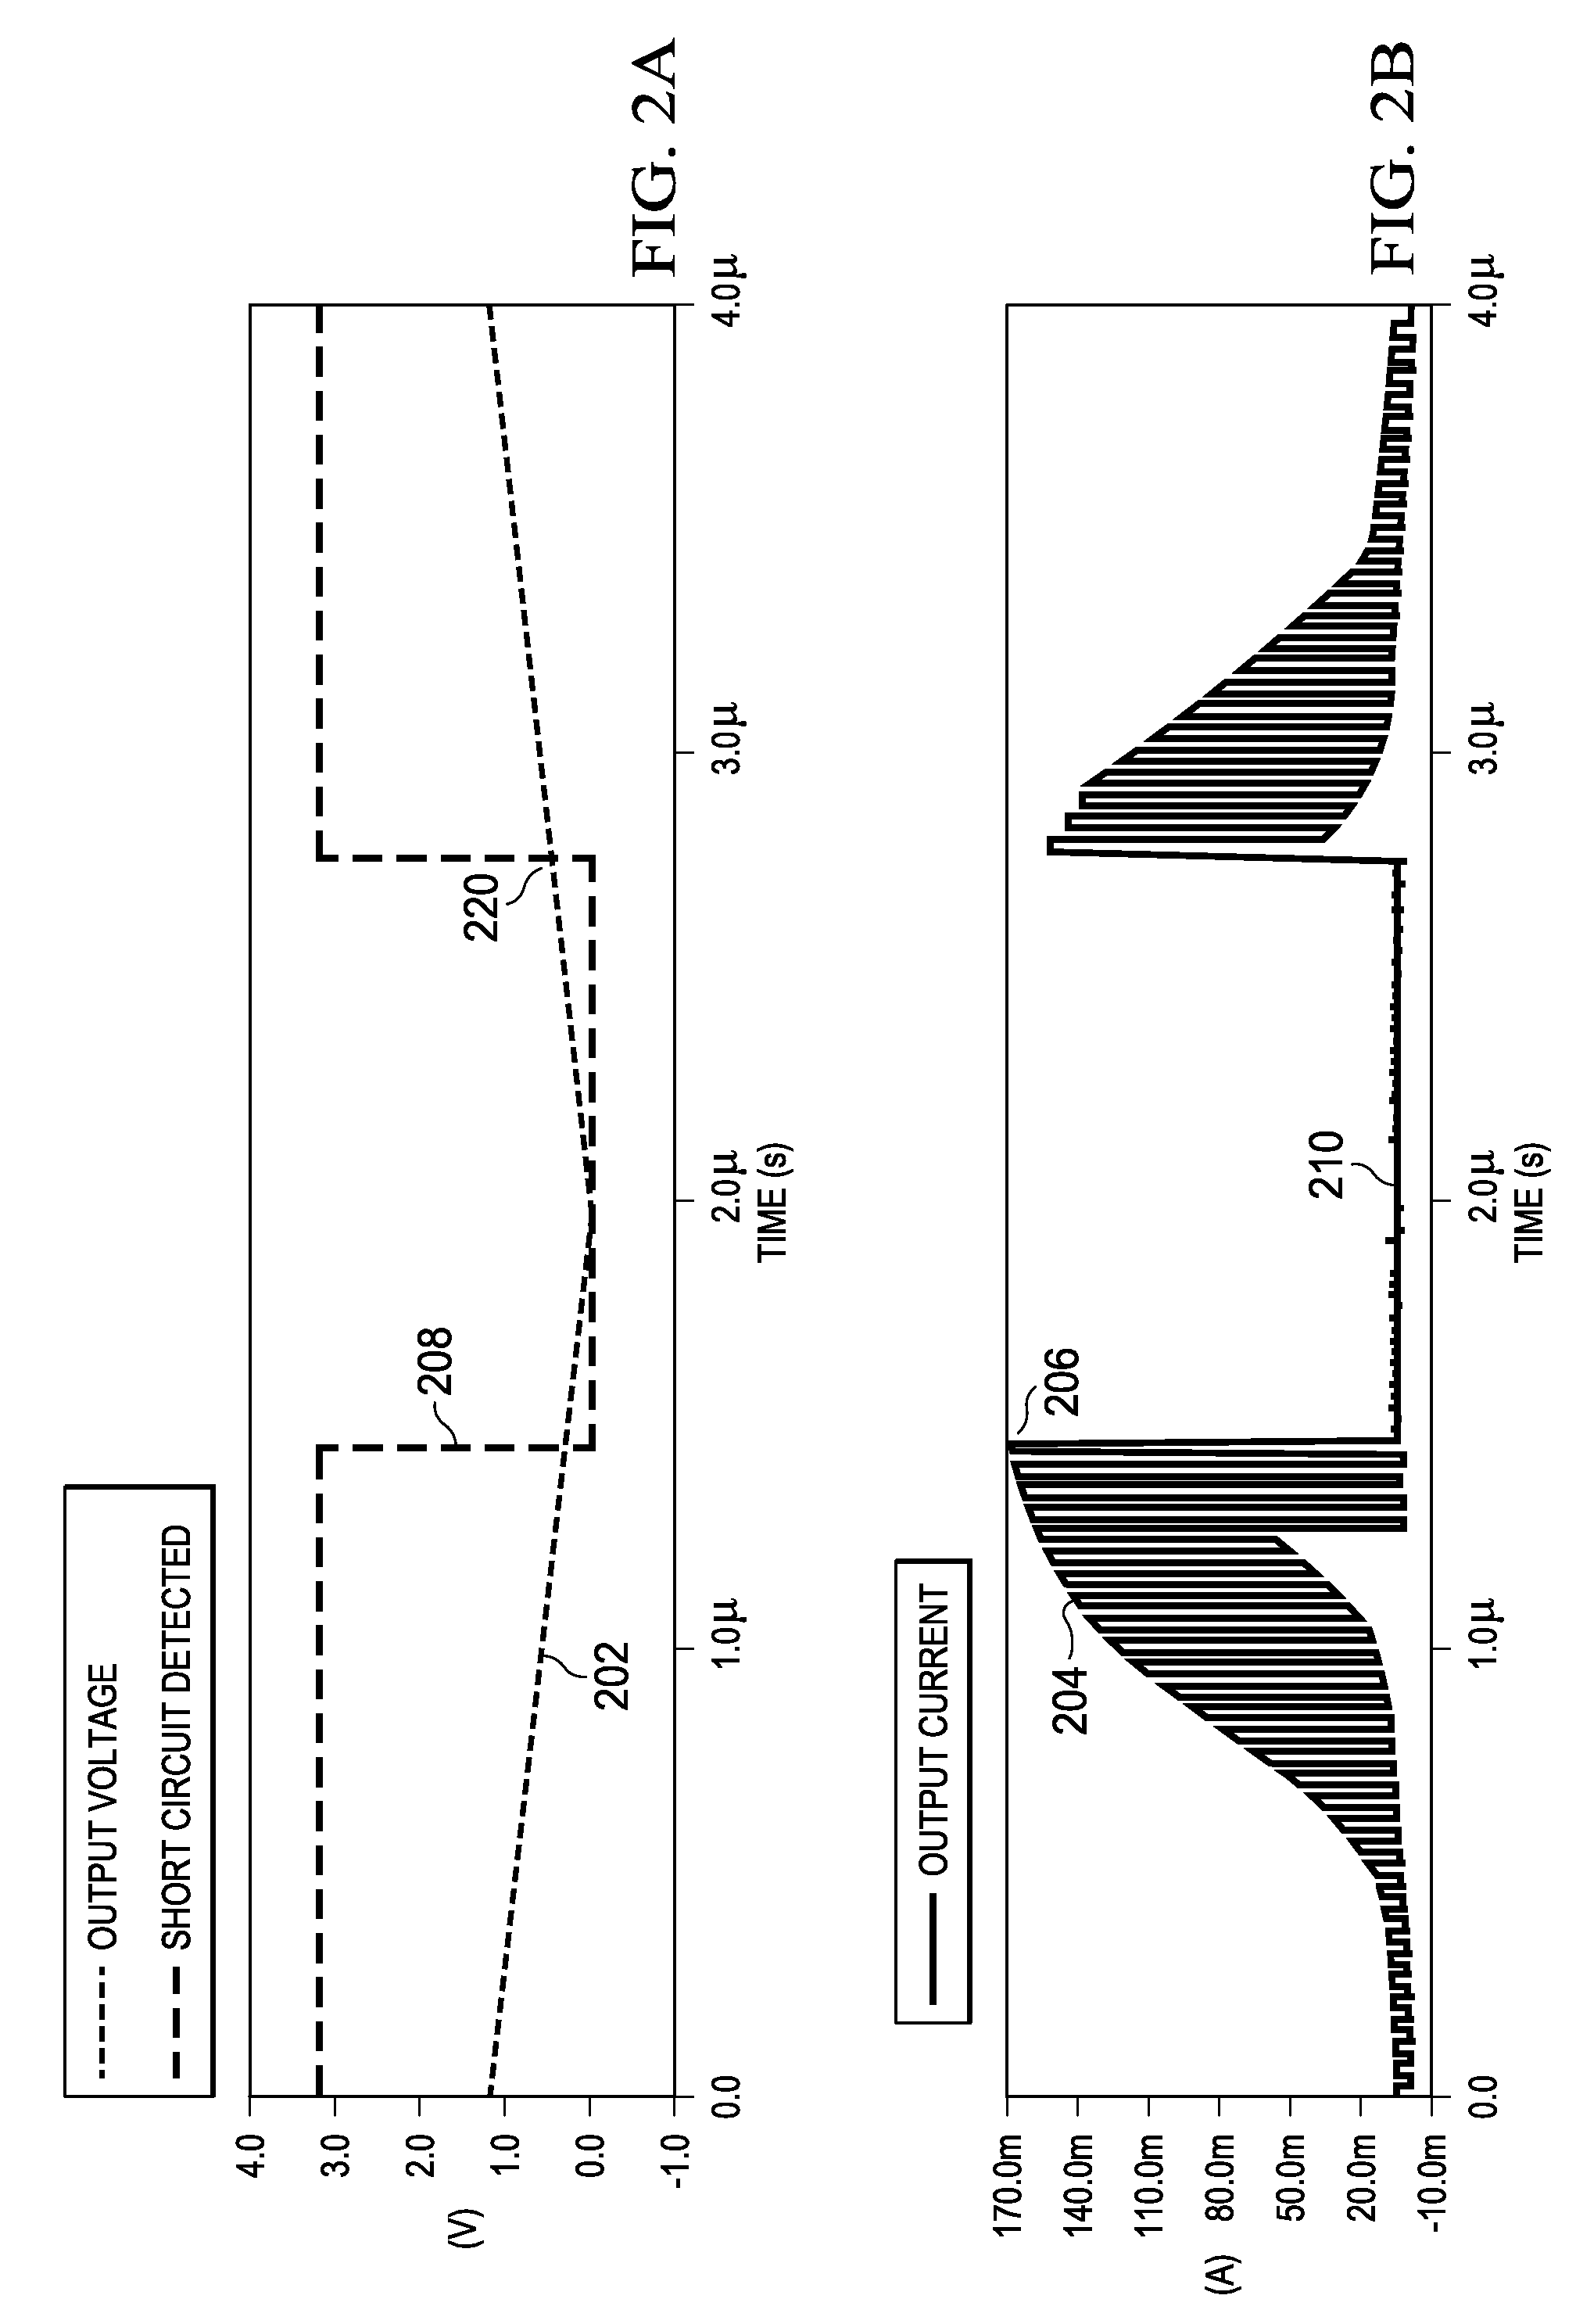 Testing integrated circuit packaging for output short circuit current